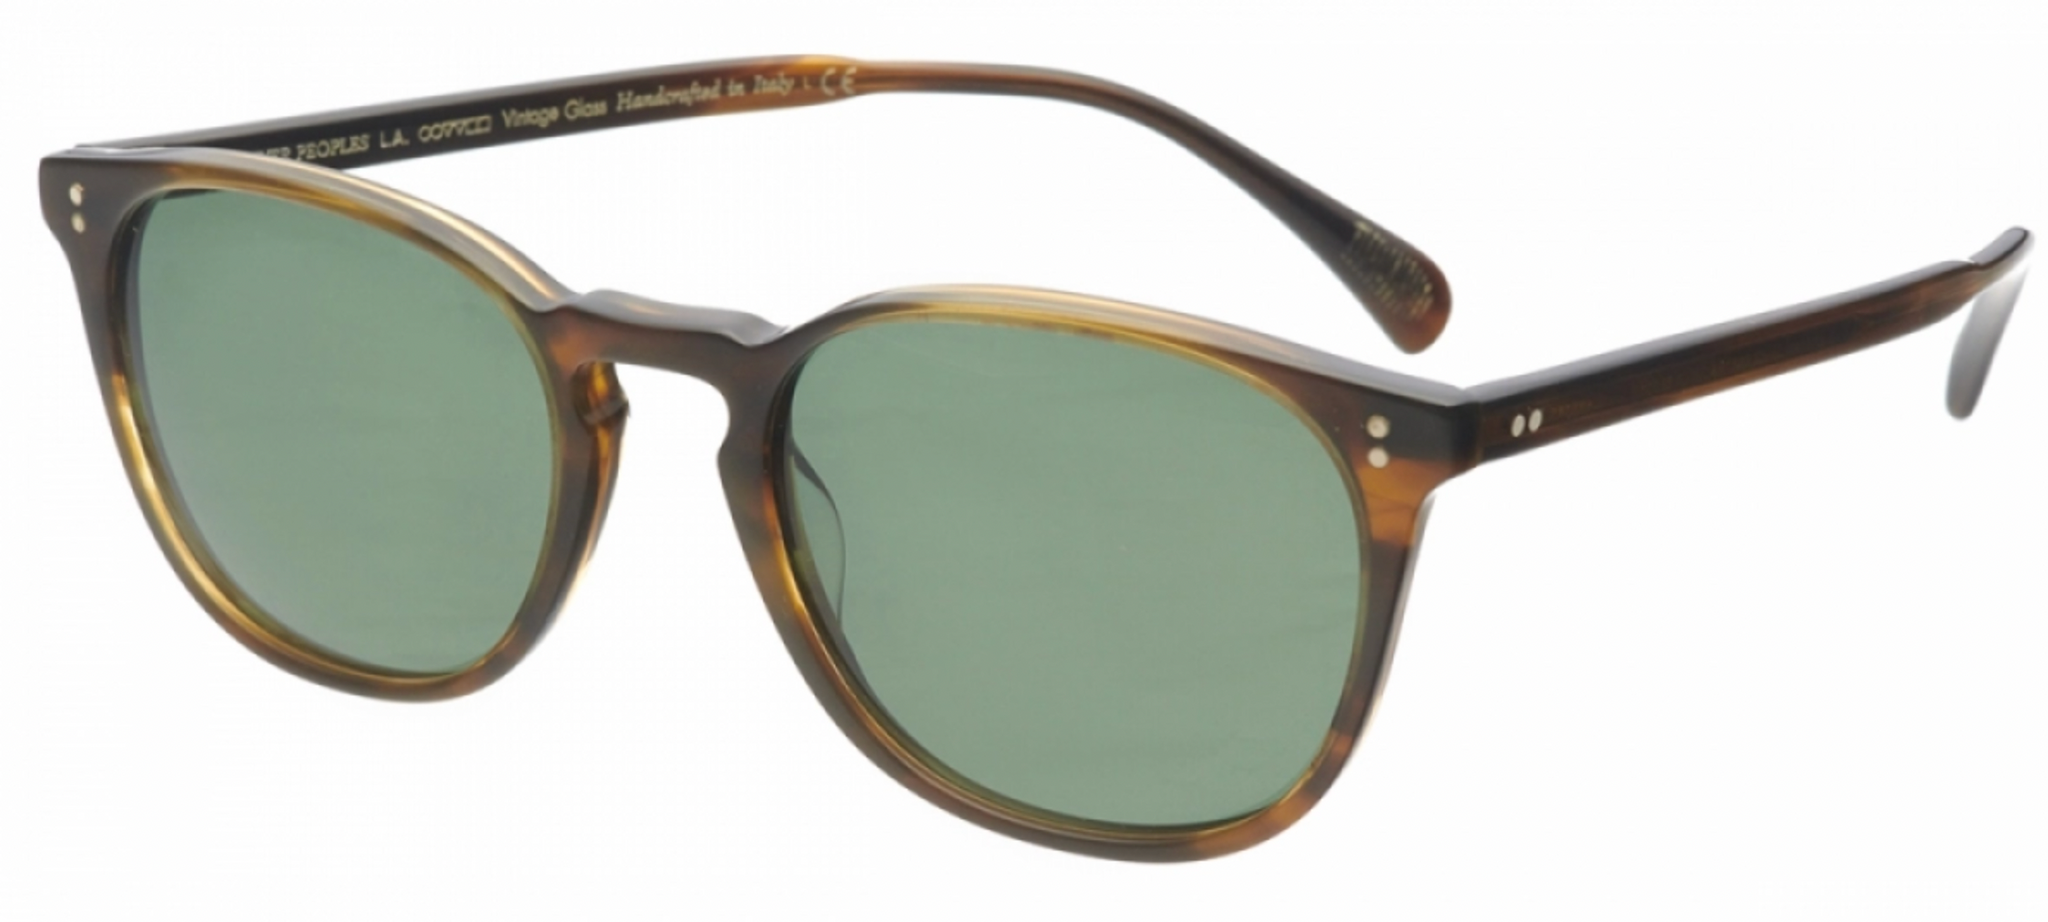 Oliver Peoples - Finley Esq Sun